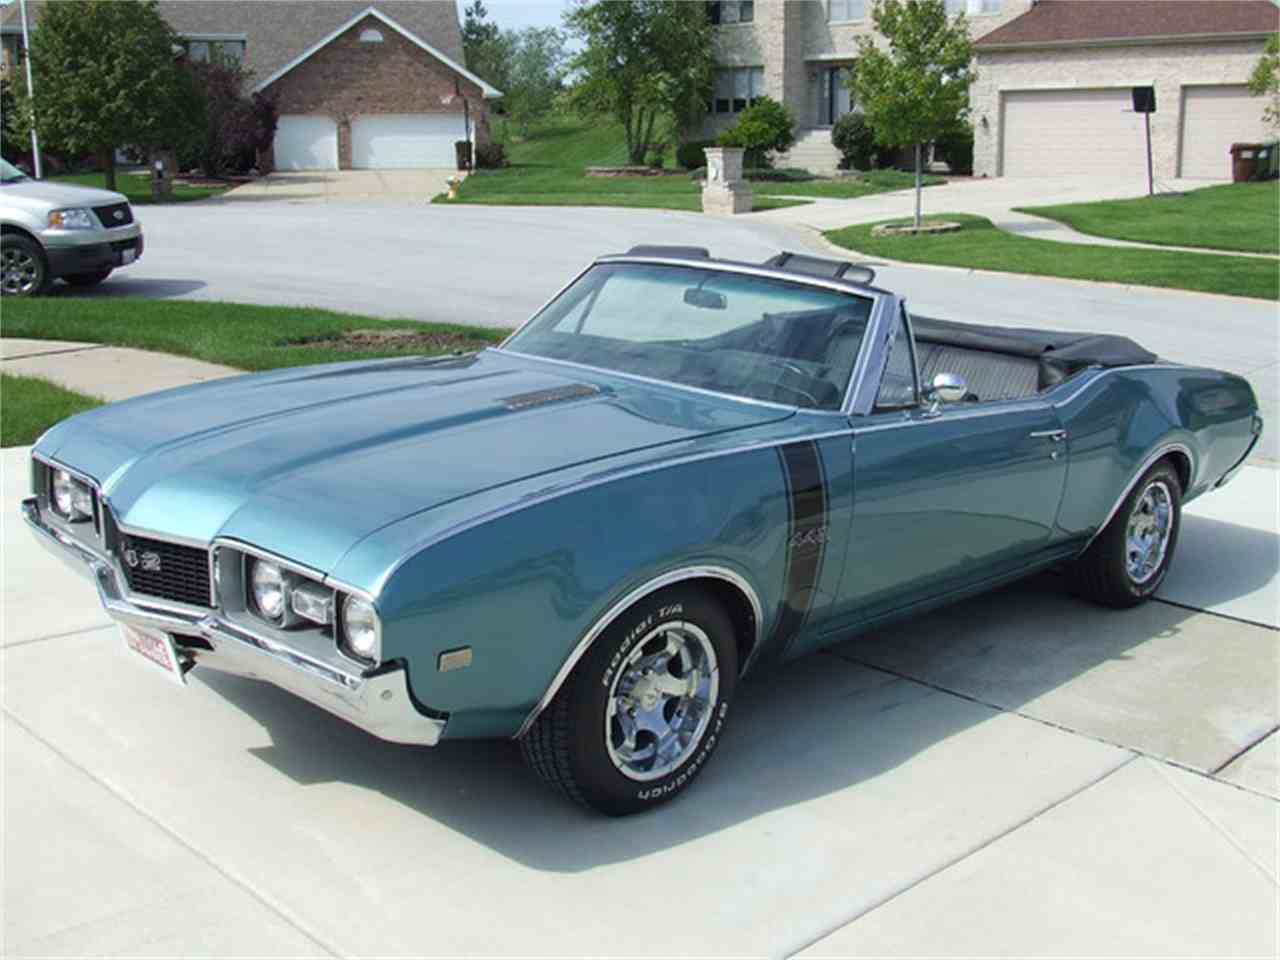 1968 Oldsmobile 442 For Sale Classiccars Cc 582760 for classic car 442